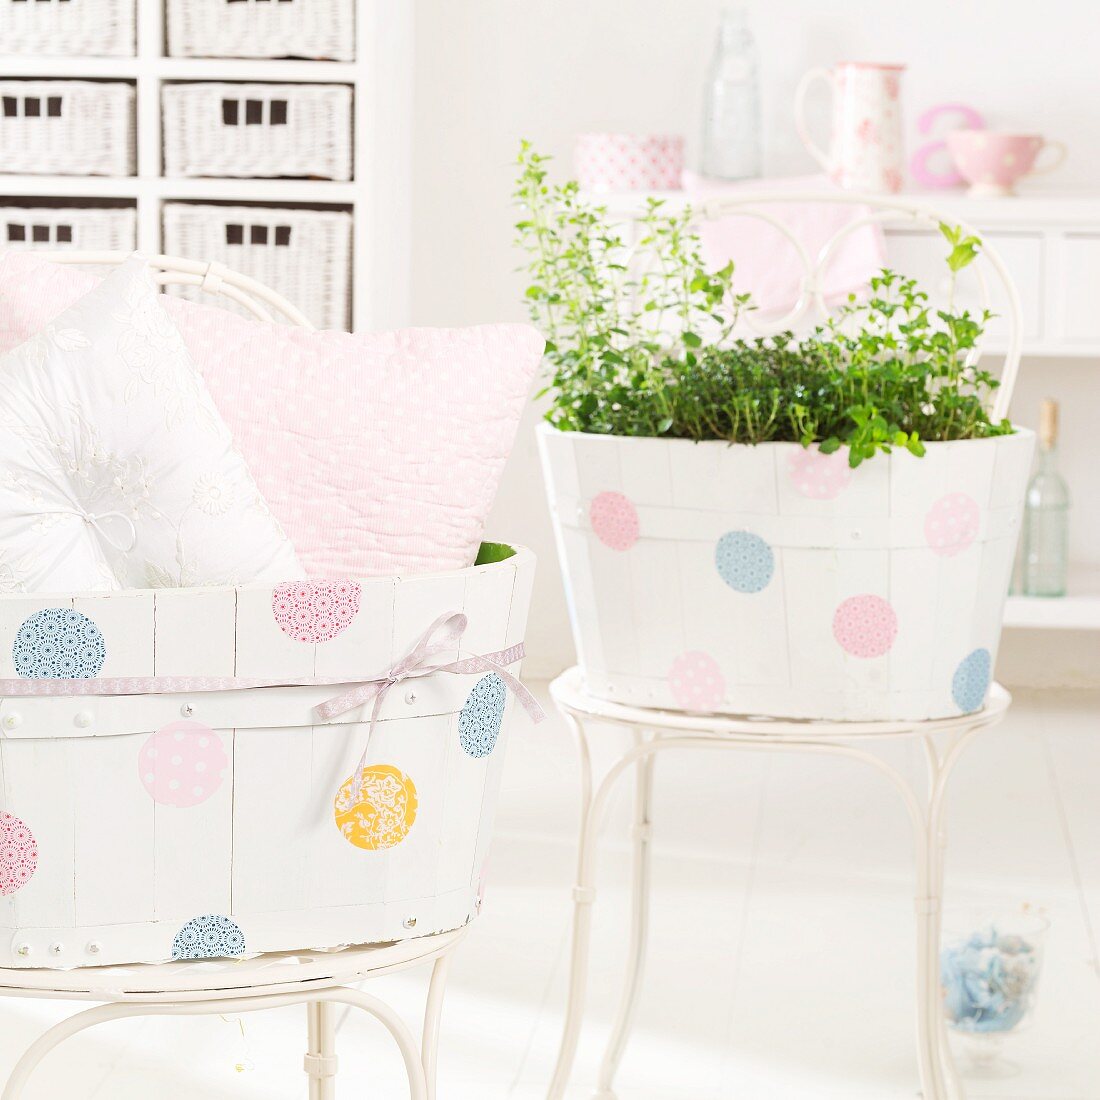 Wooden boxes painted with polka dots on delicate, metal garden chairs